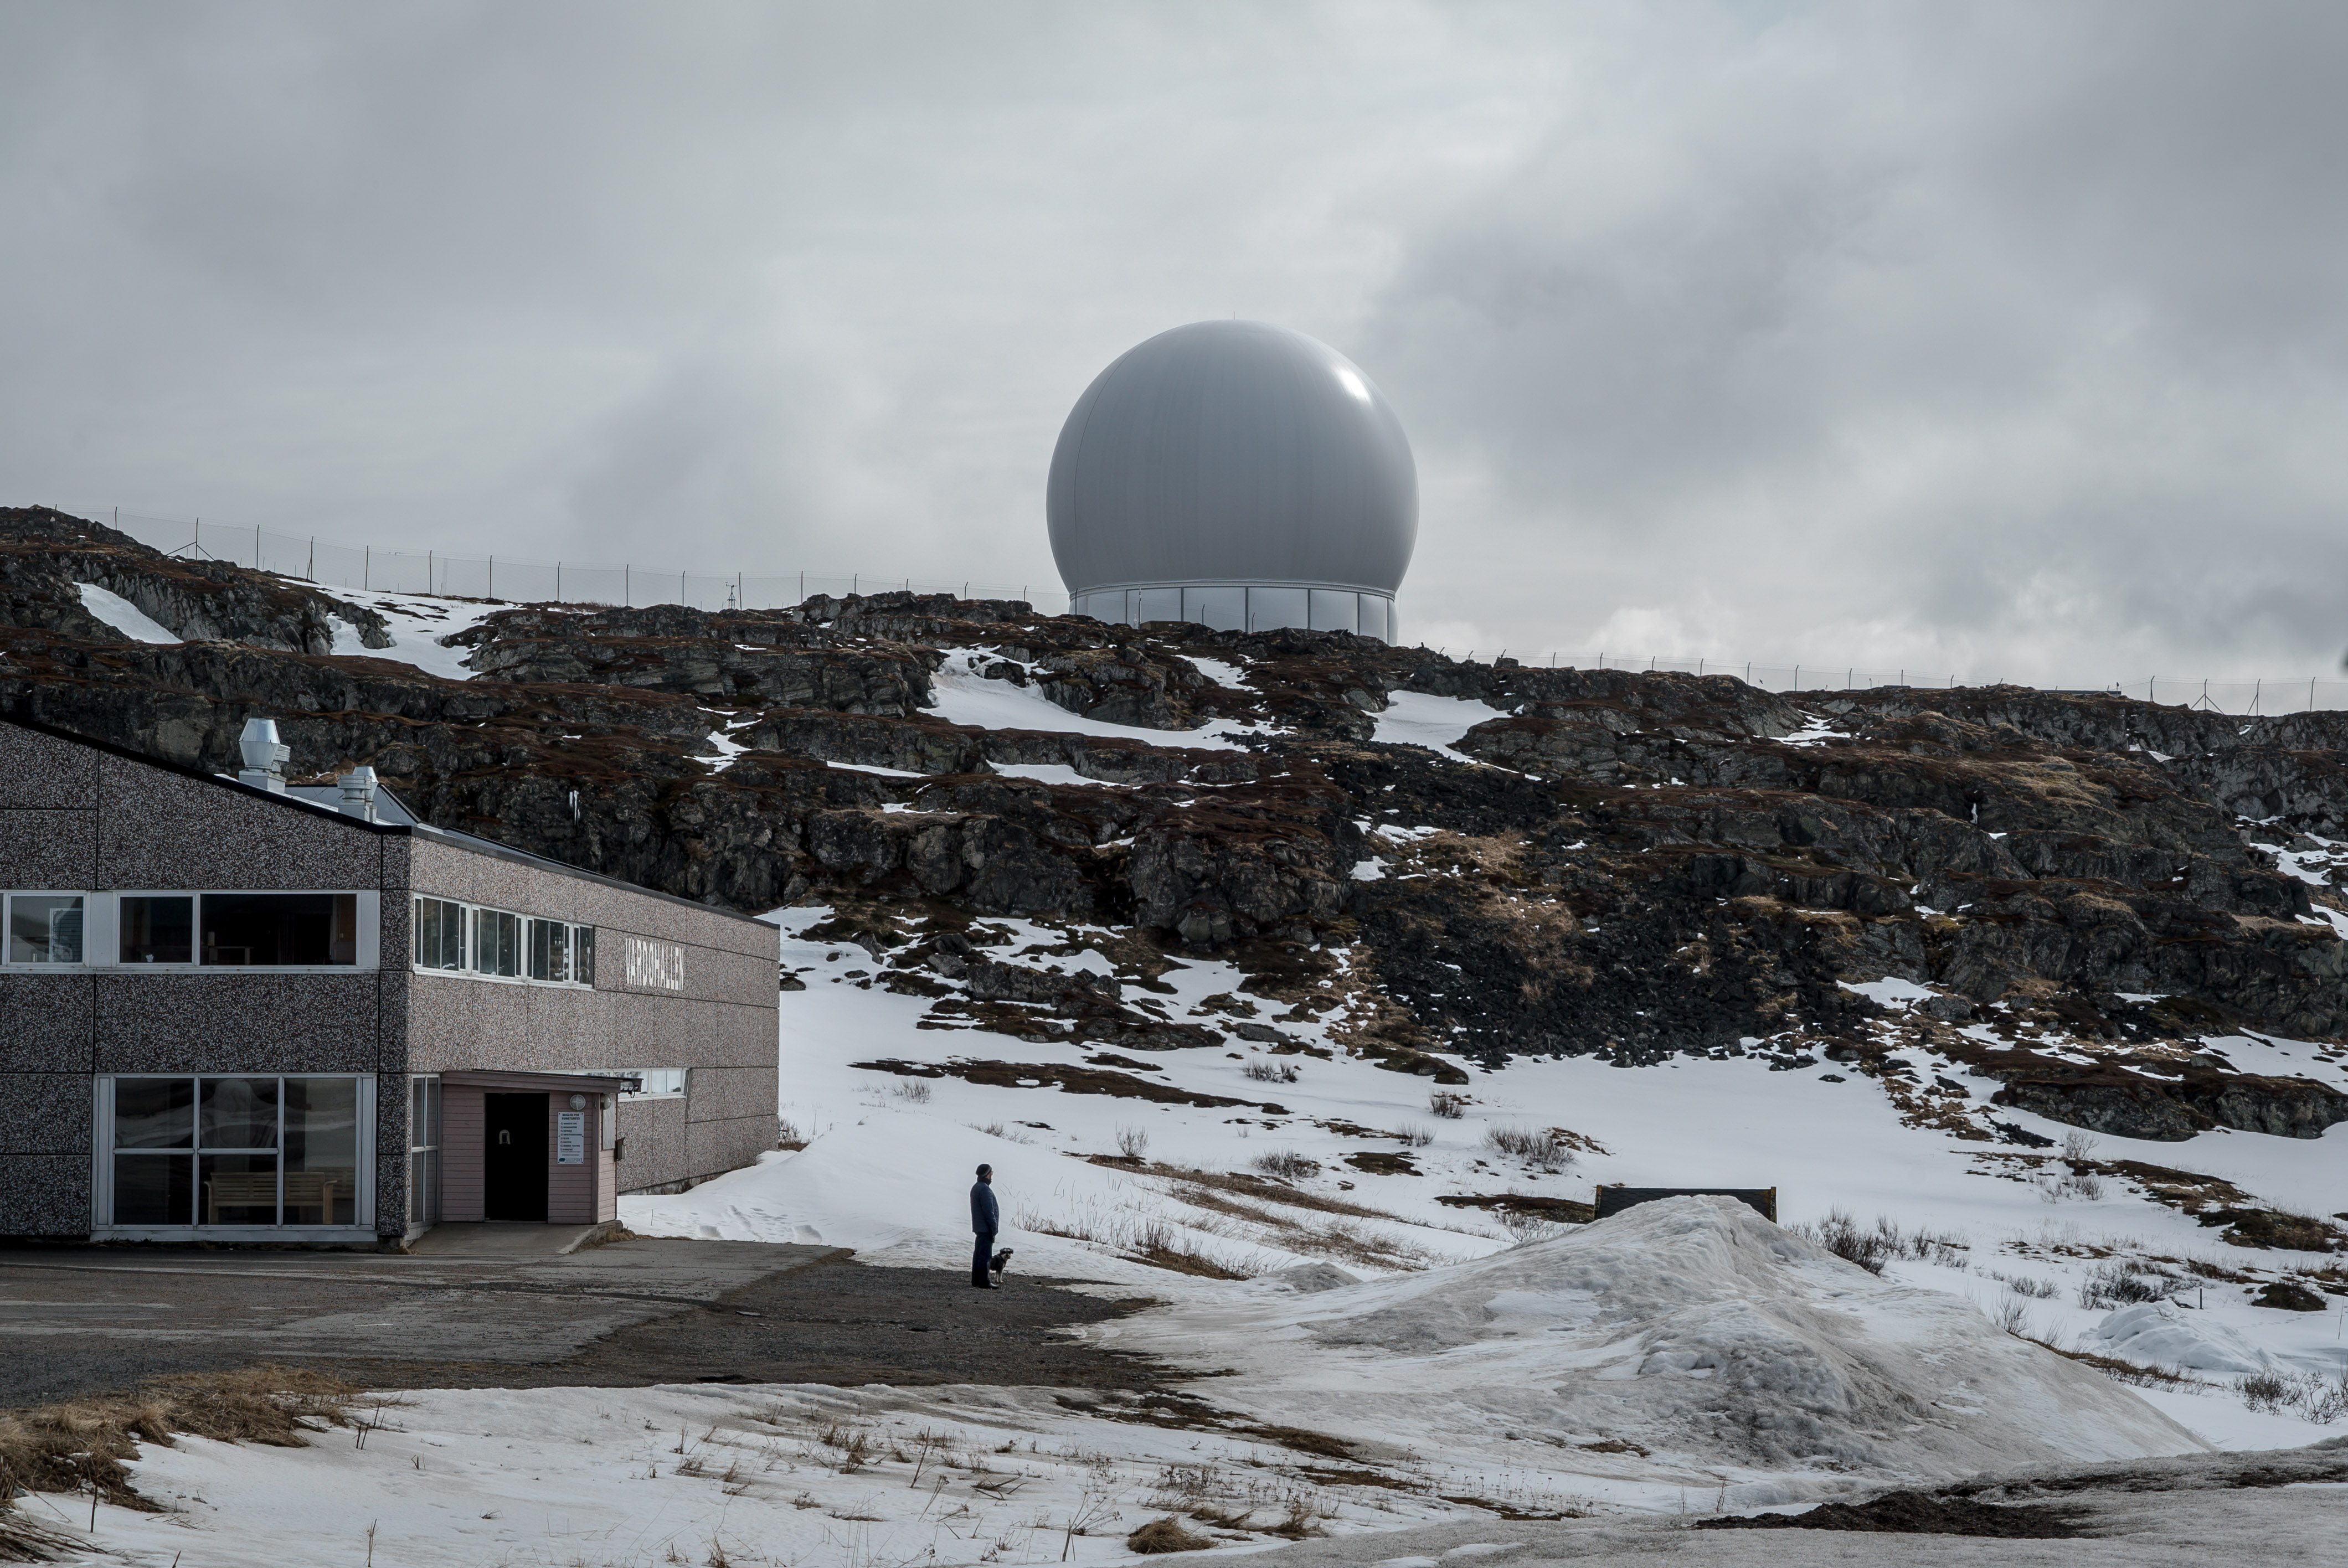 A radar station in Vardo, an island town in Norway's remote northeast which lies near restricted Russian naval bases, May 13, 2017. The secretive American-Norwegian radar facility has provided a much-needed economic lifeline in Vardo, but also spawned fears over health hazards and fatalistic thoughts about the town's fate should Russia and NATO ever enter into direct conflict. (Andrew Testa/The New York Times)